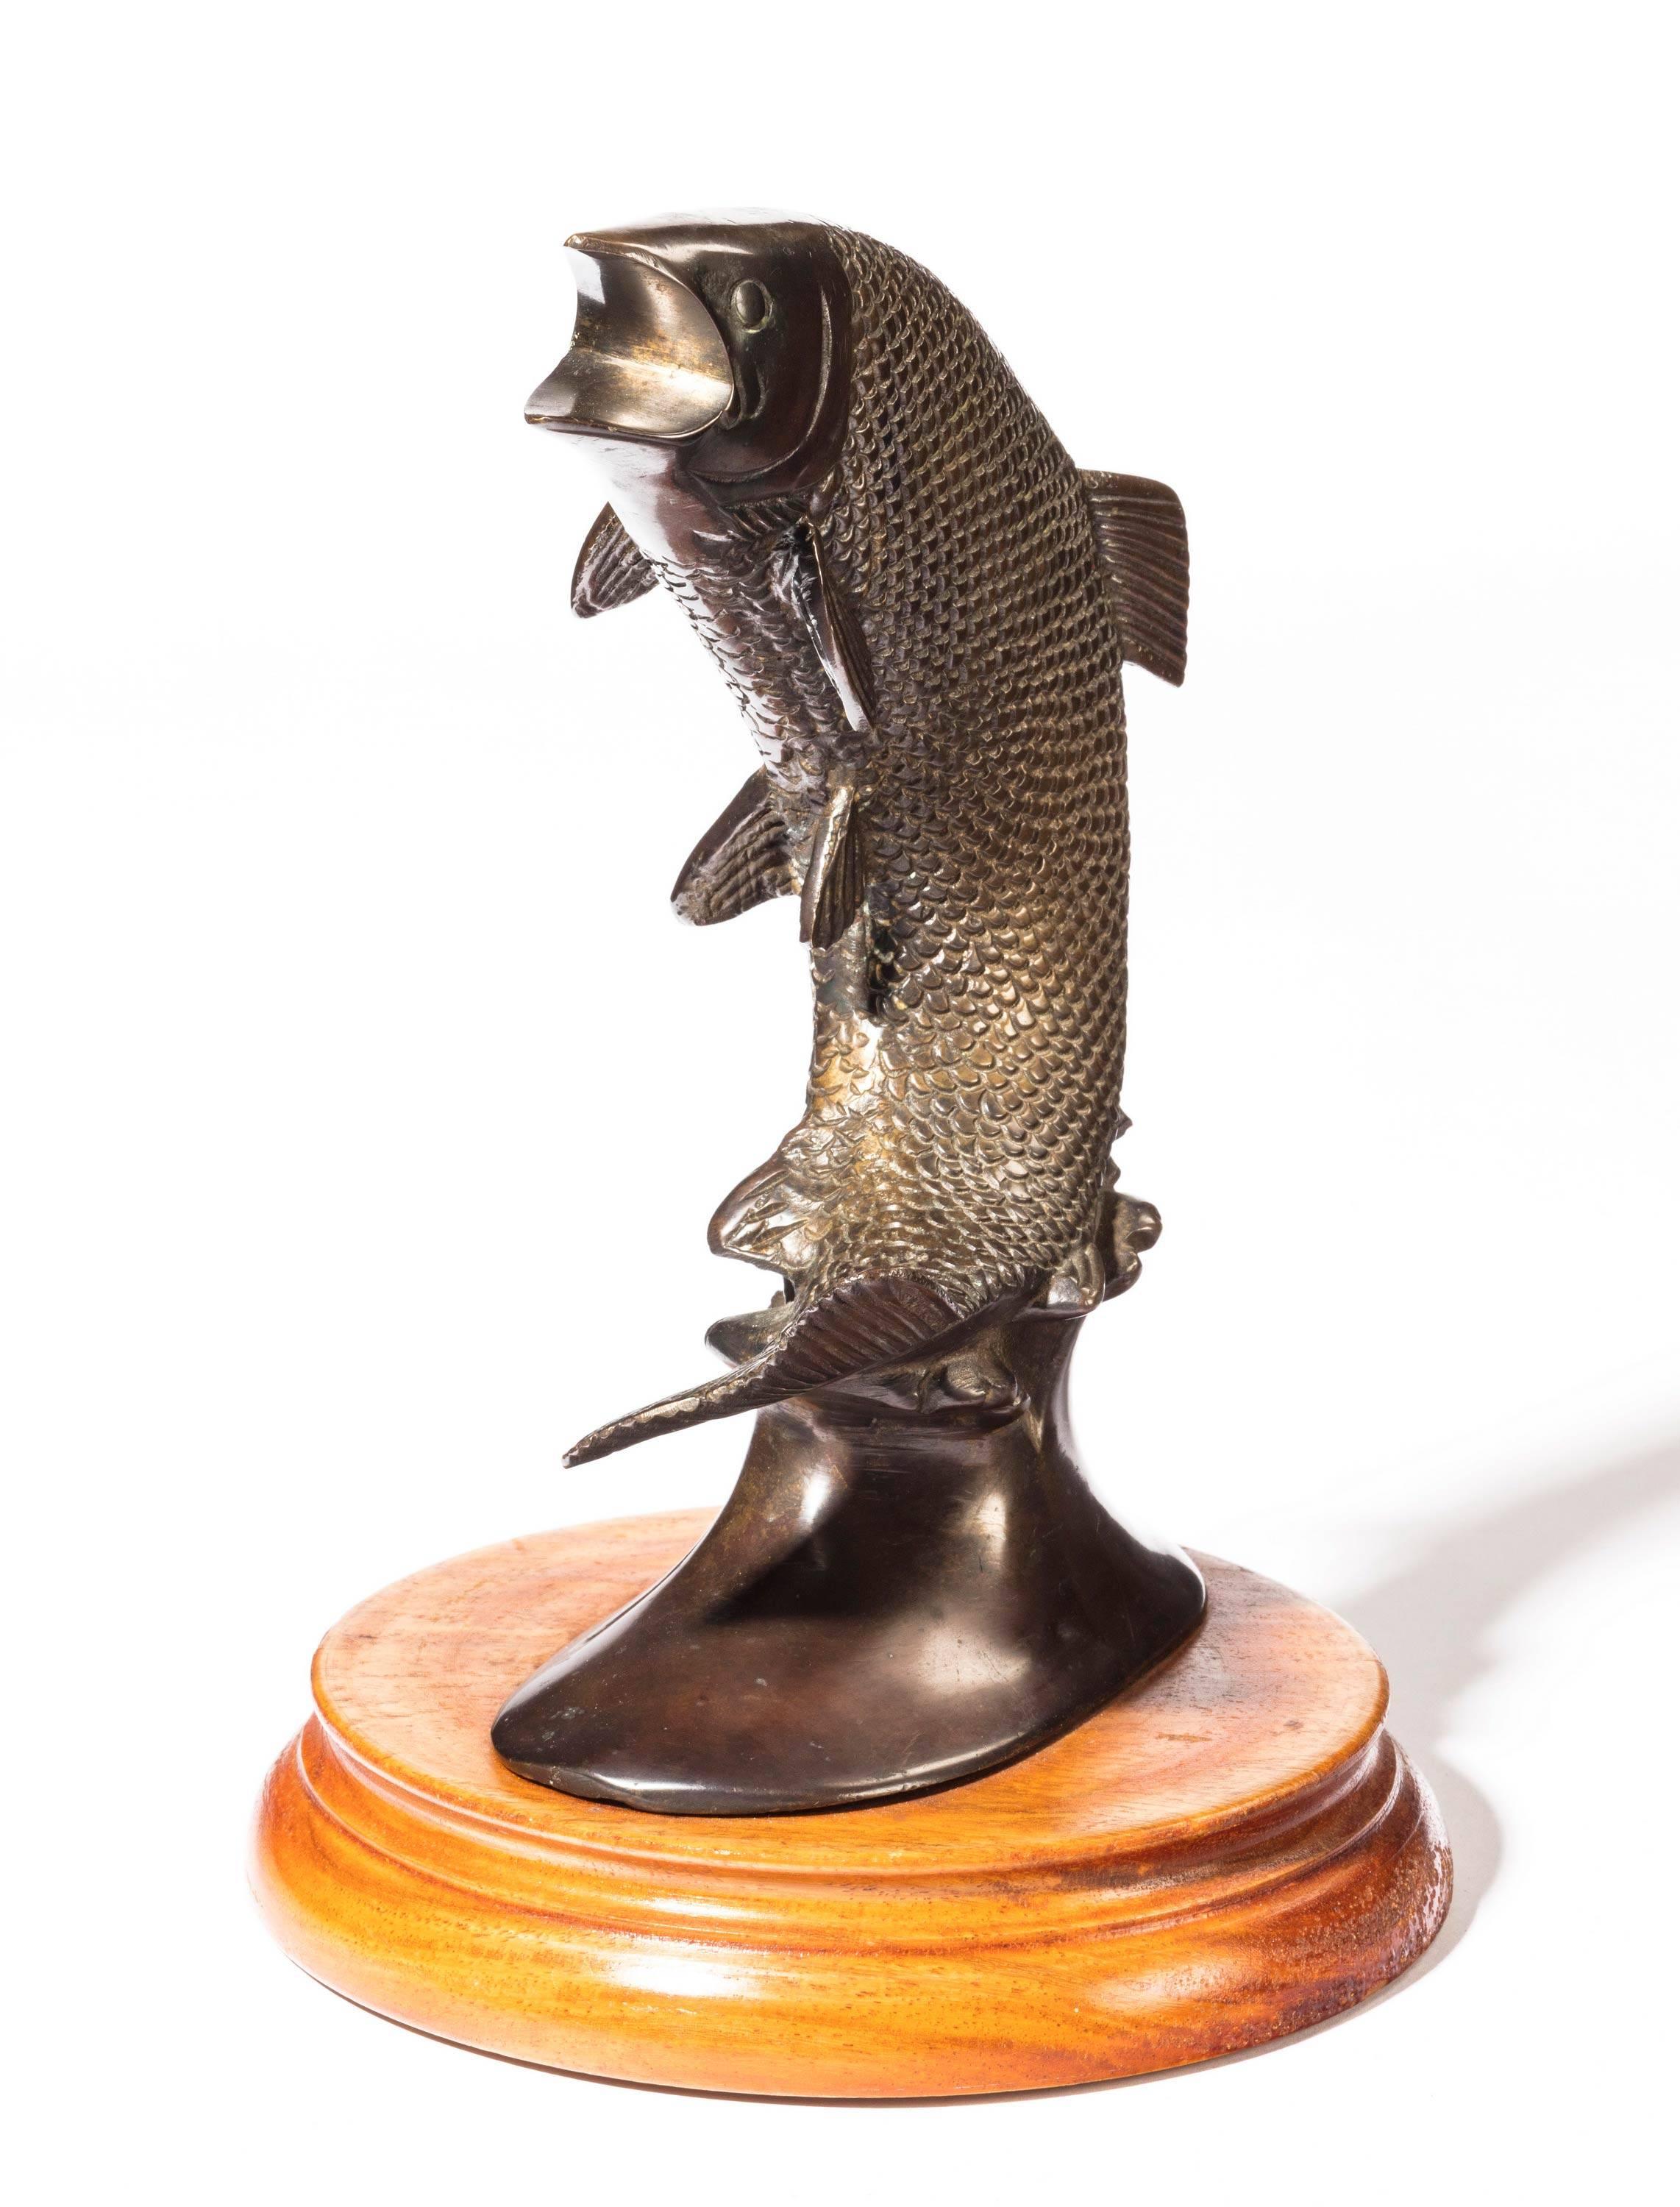 A cast bronze figure of a leaping salmon on an original walnut base. Evenly patinated.